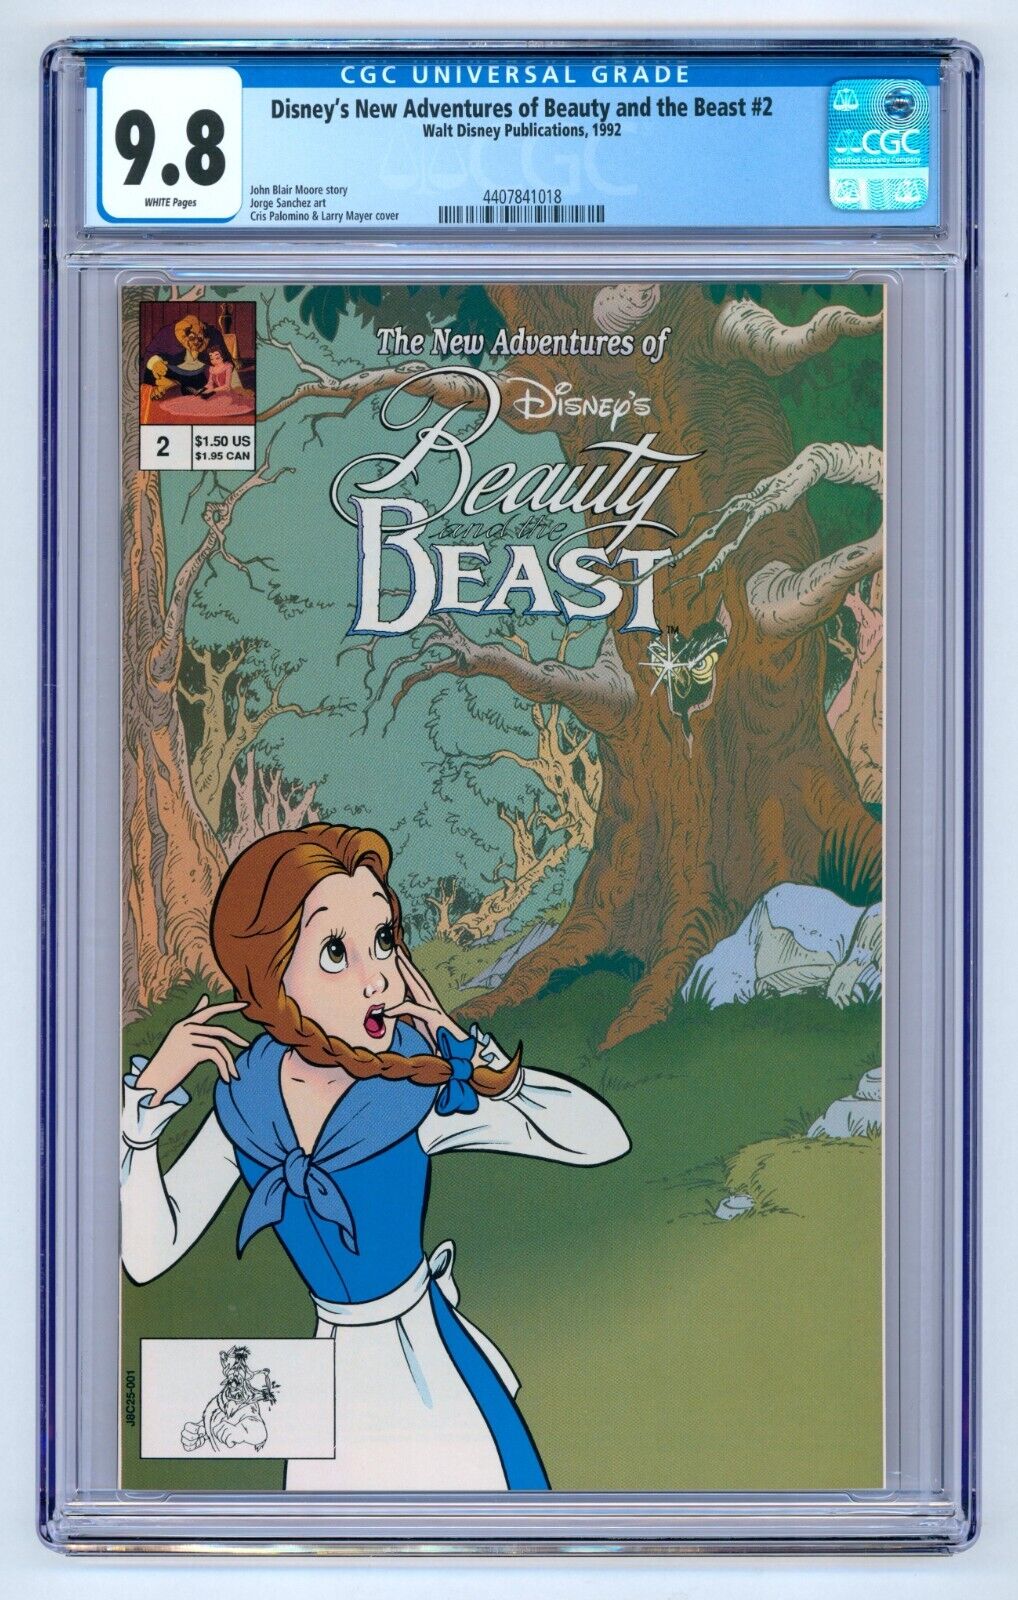 Disney's New Adventures of Beauty and the Beast #2 CGC 9.8 (1992) - Belle